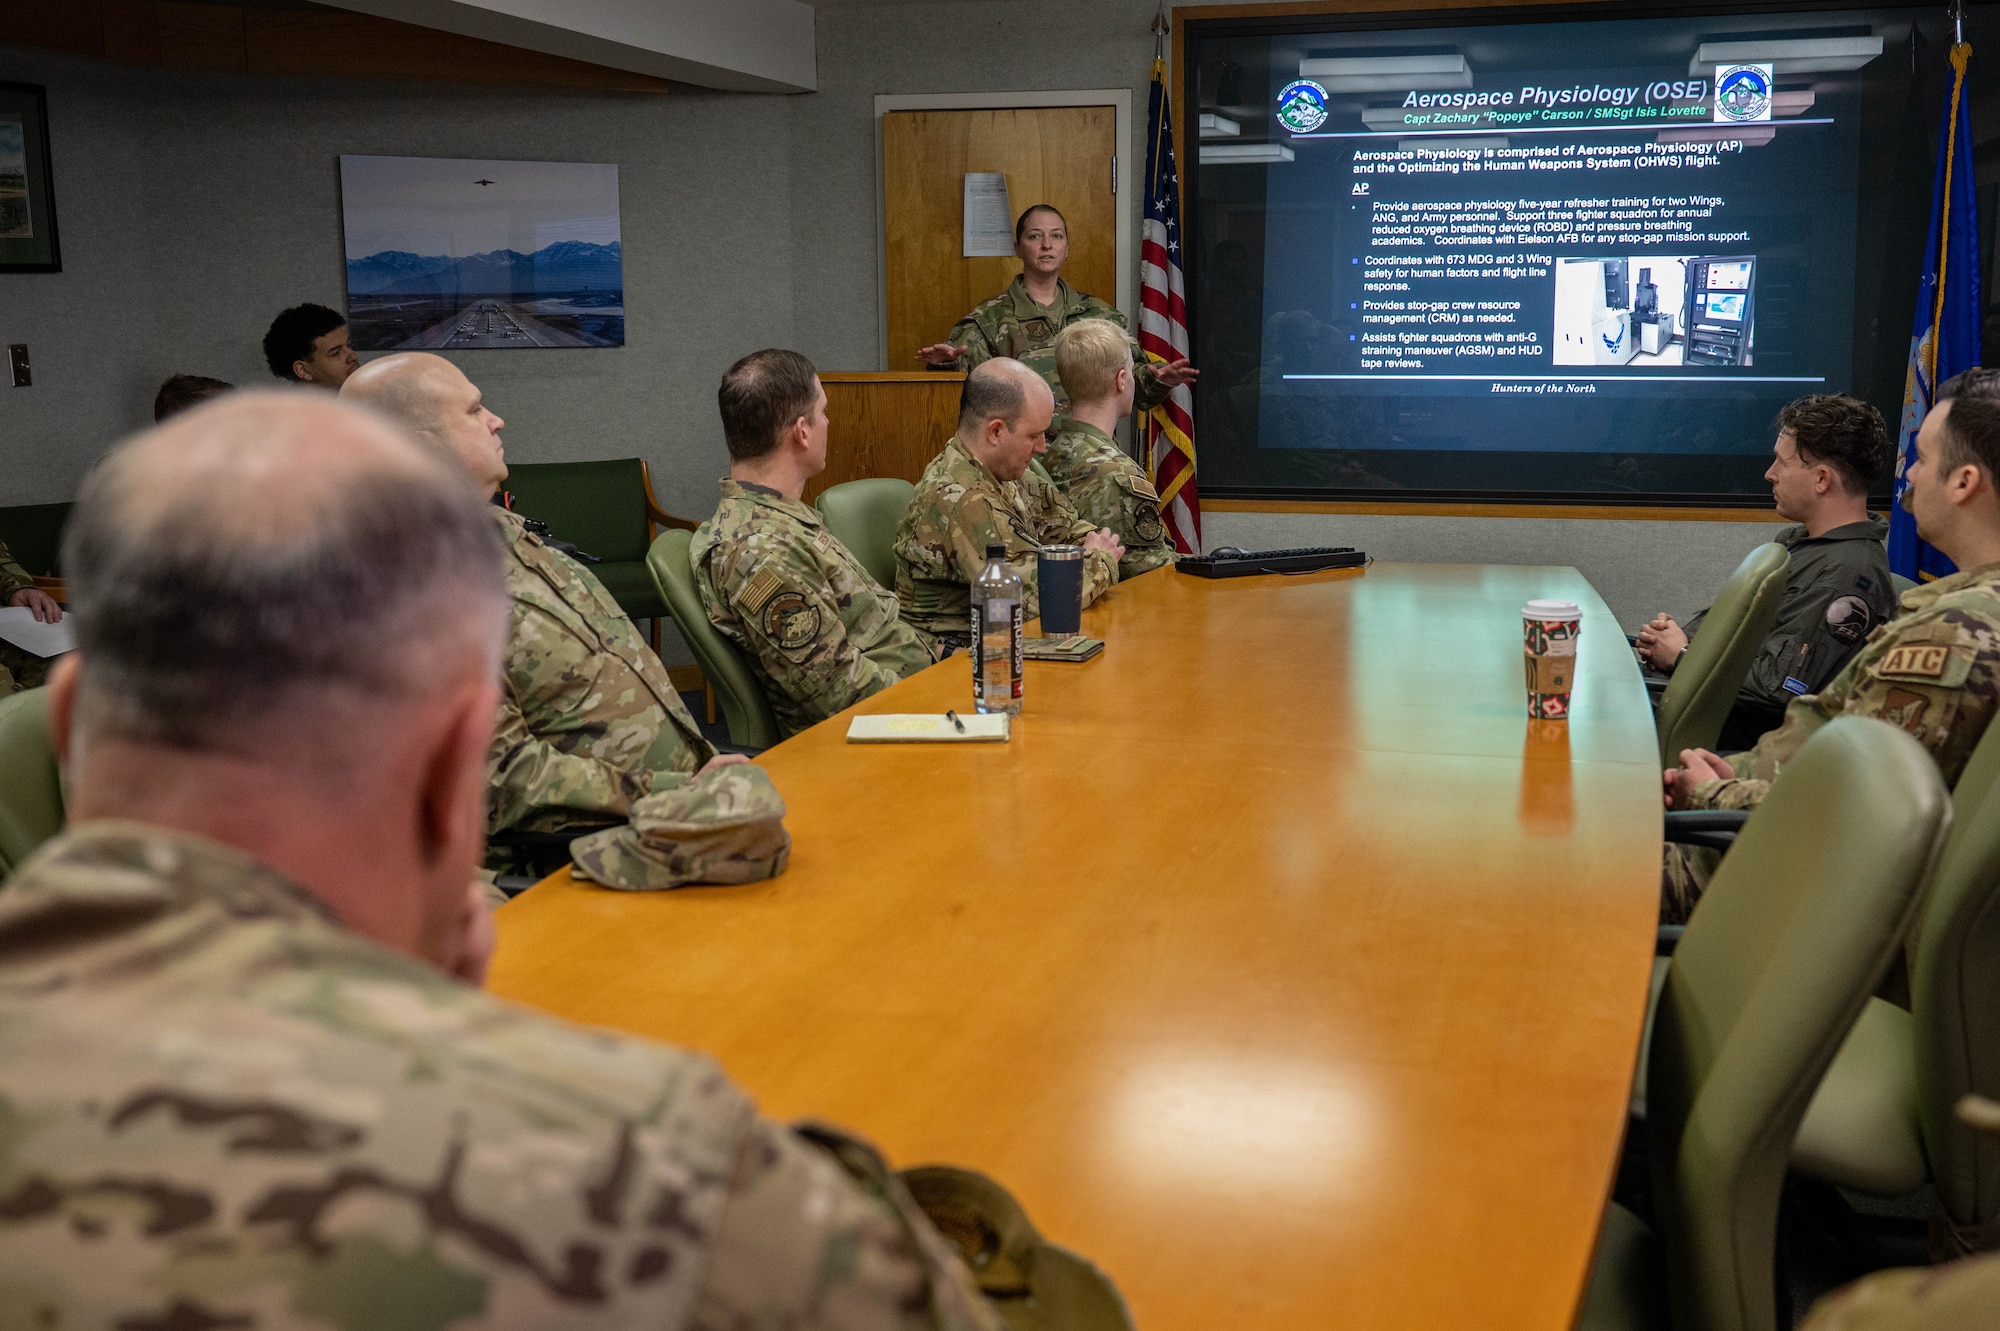 An Airman briefing in a conference room.